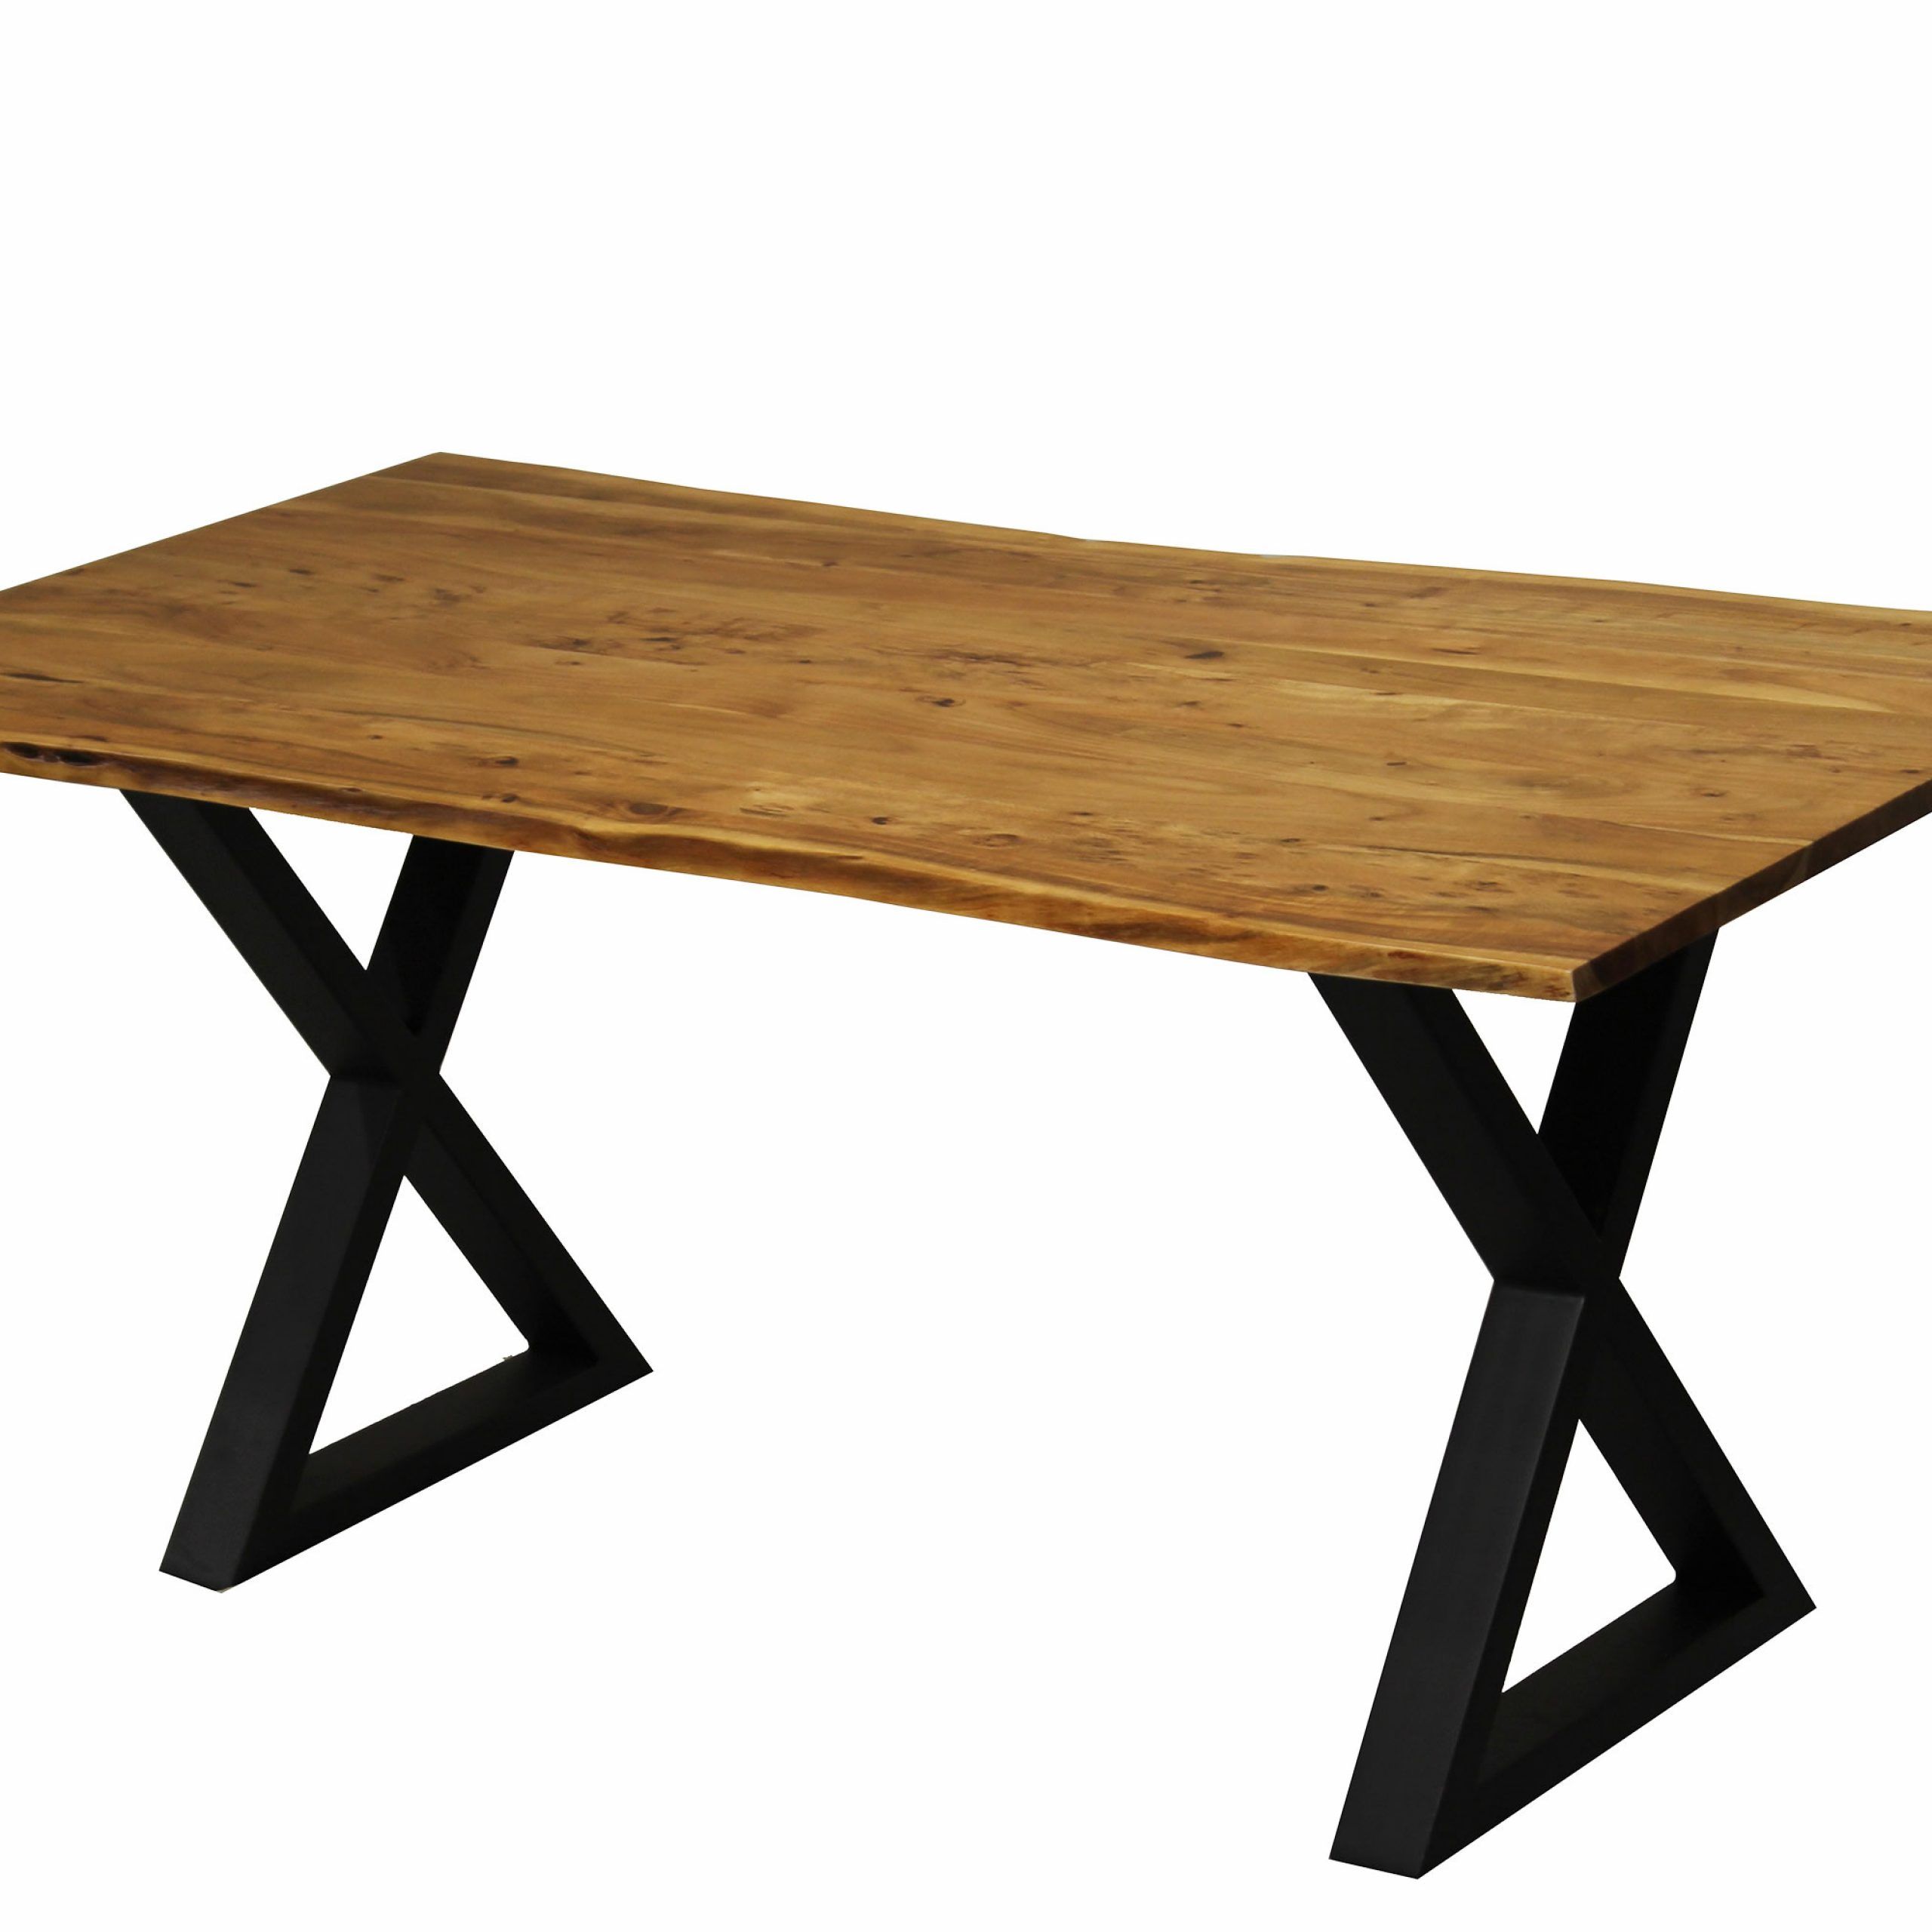 Preferred Zen Live Edge 67 Inches Dining Table (acacia – Black X Legs) Throughout Acacia Dining Tables With Black Rocket Legs (View 7 of 25)